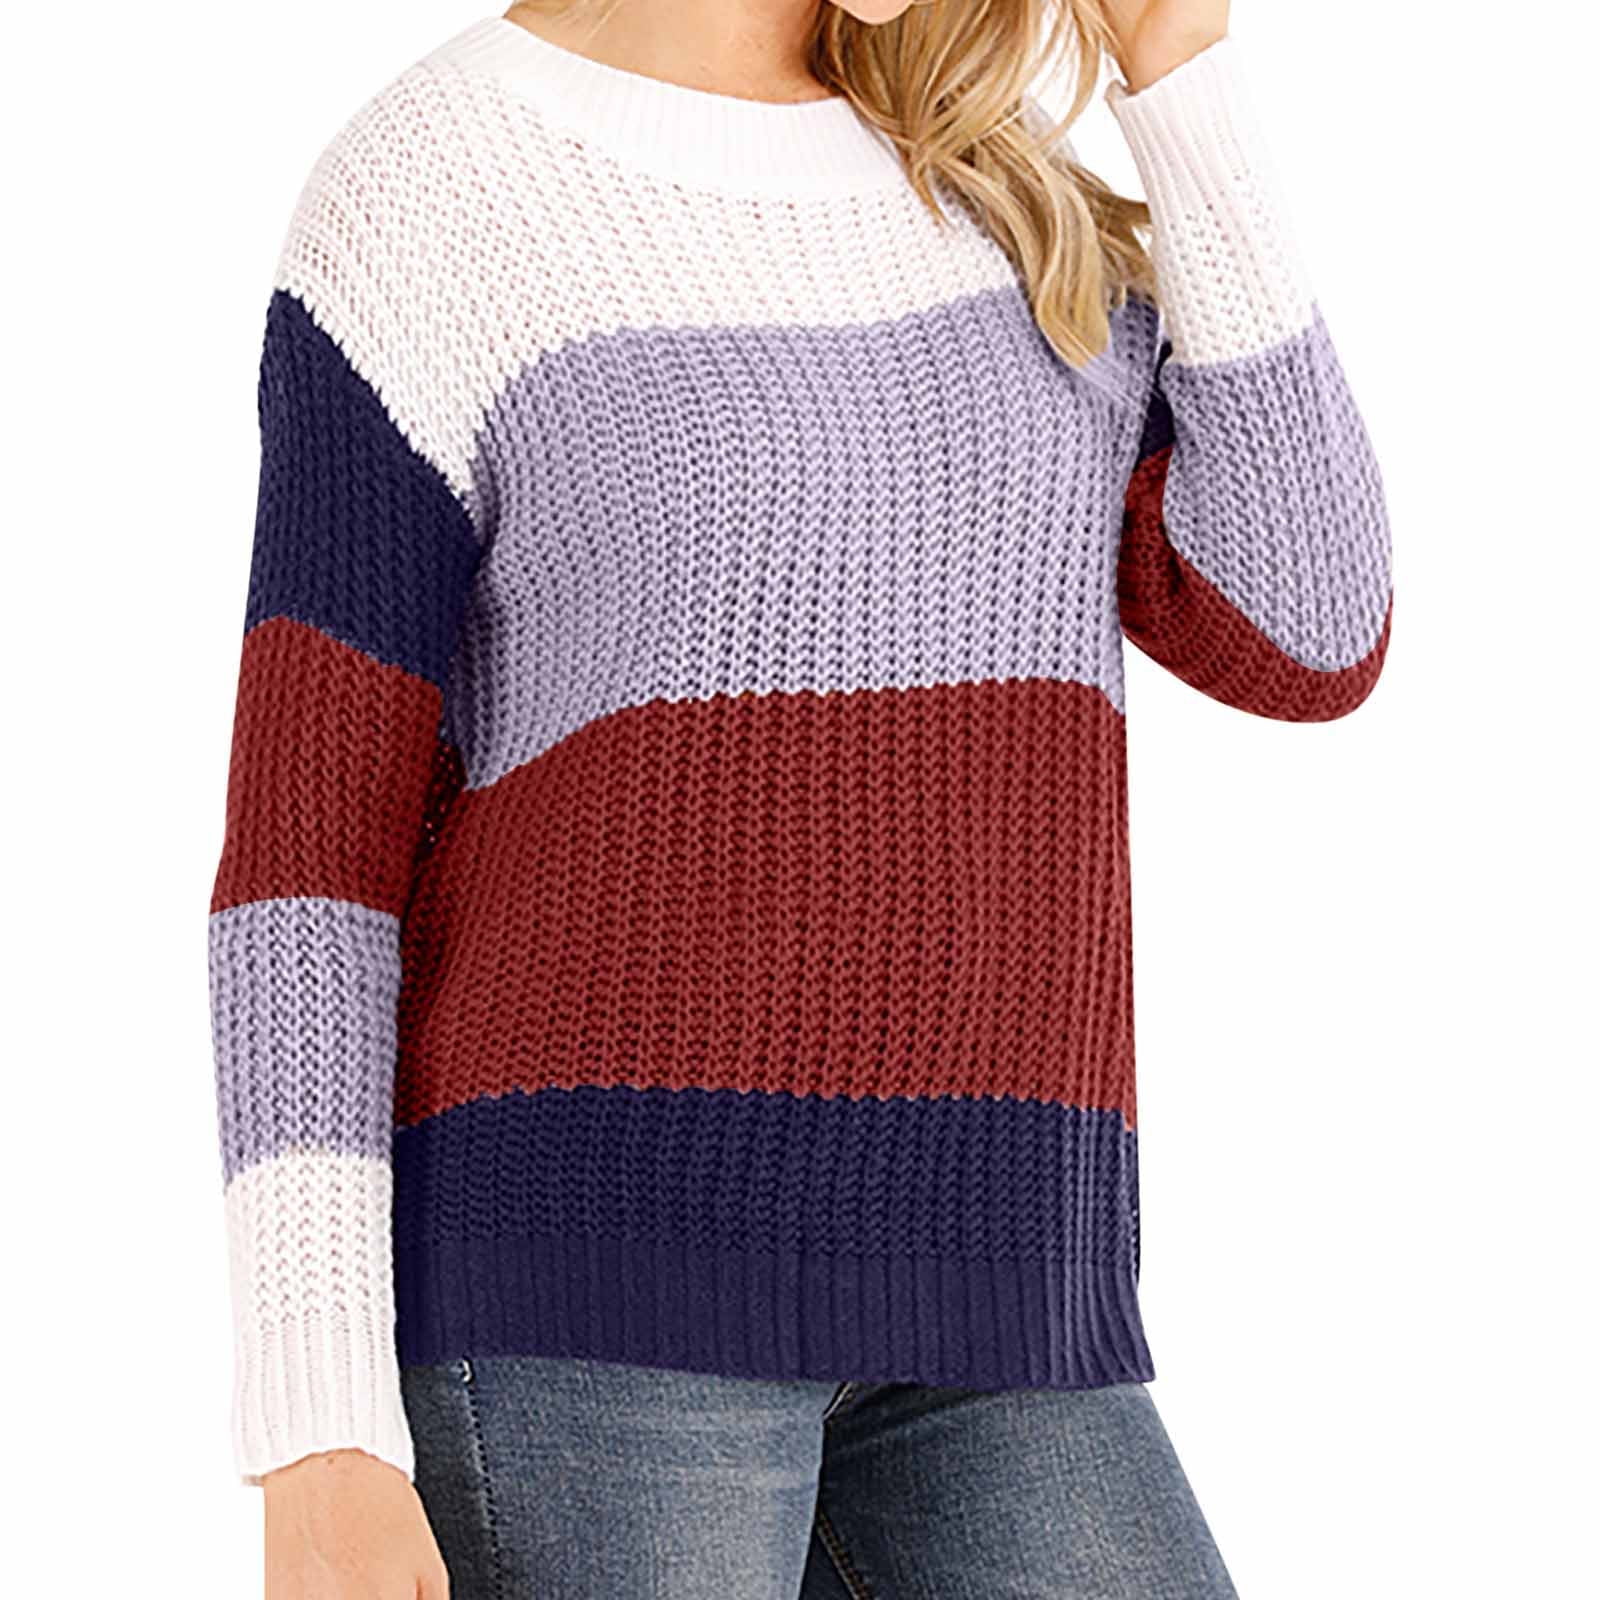 Hfyihgf Women's Long Sleeve Crew Neck Jumper Tops Striped Color Block Casual  Loose Knitted Pullover Sweater（Wine,S) 